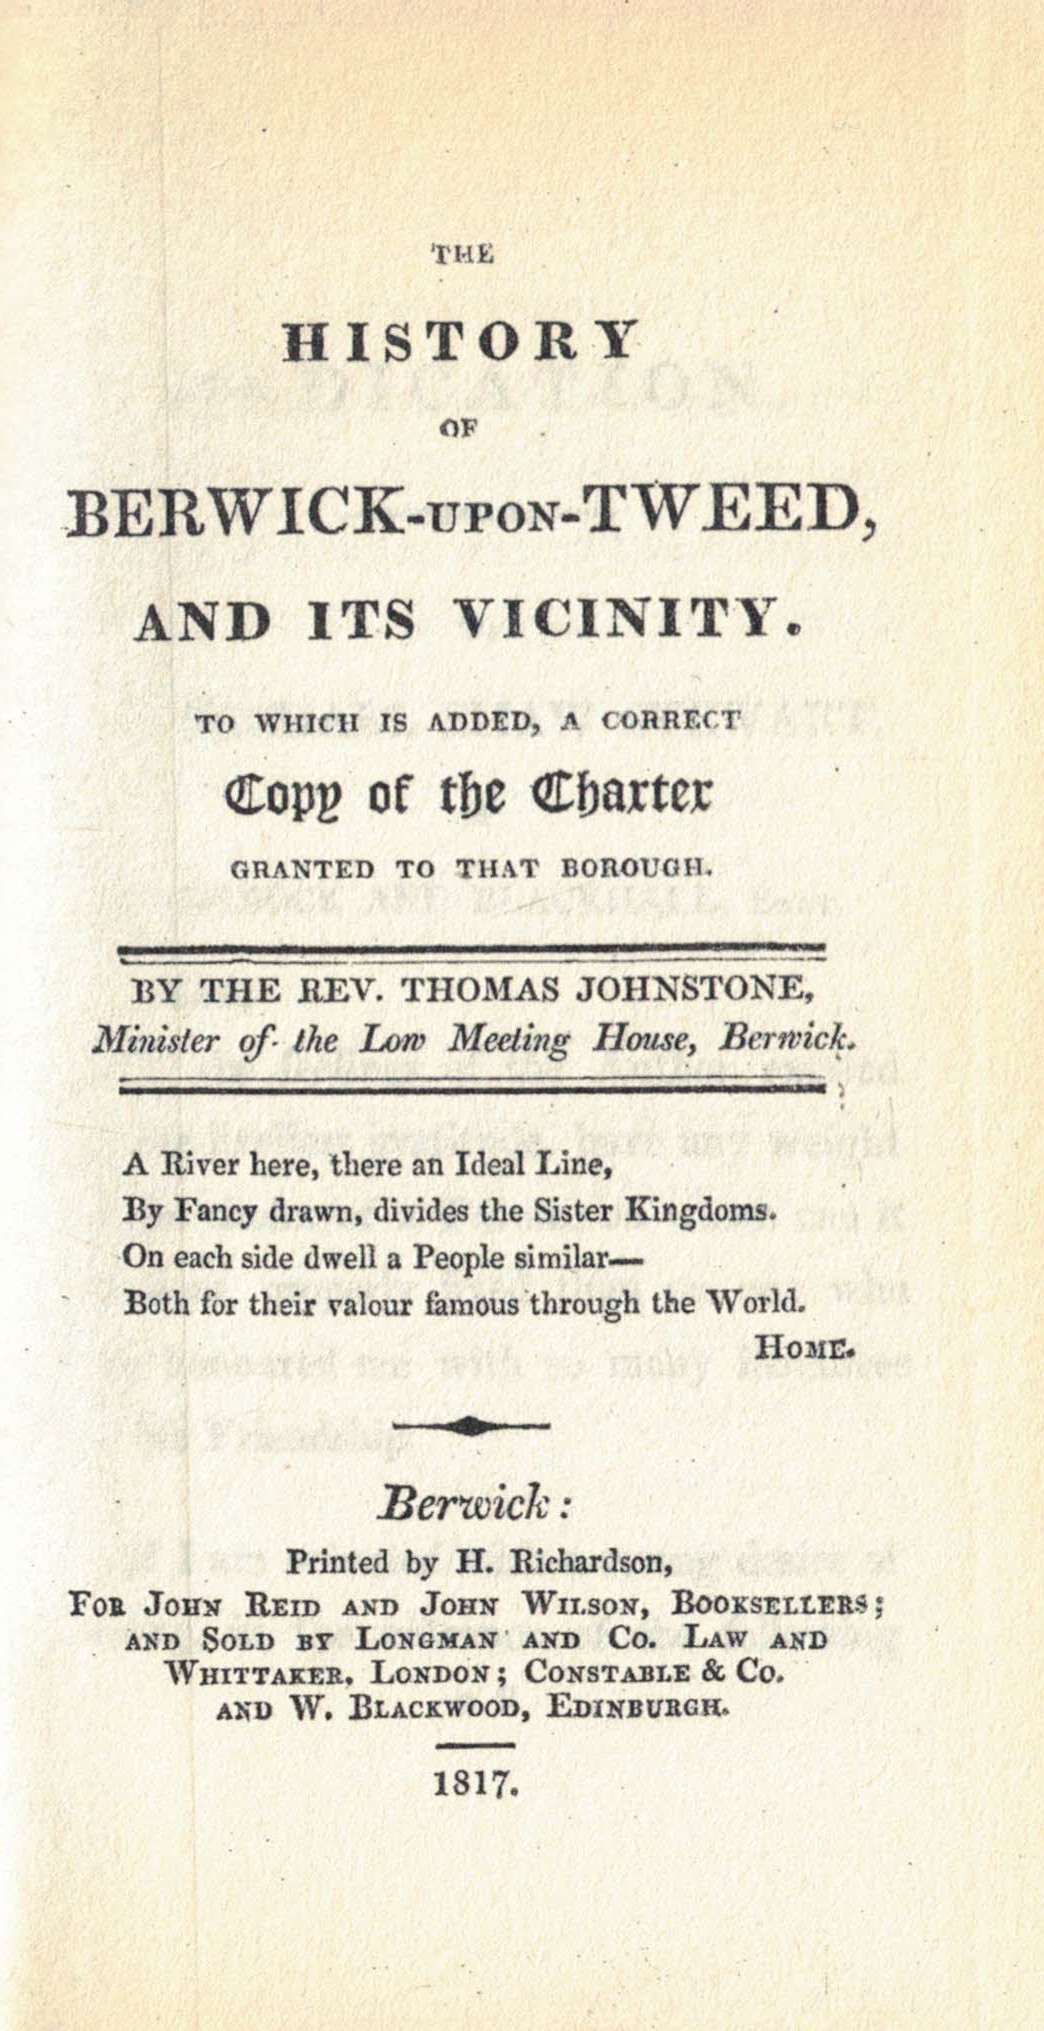 The History of Berwick-upon-Tweed (1817): Facsimile Edition.